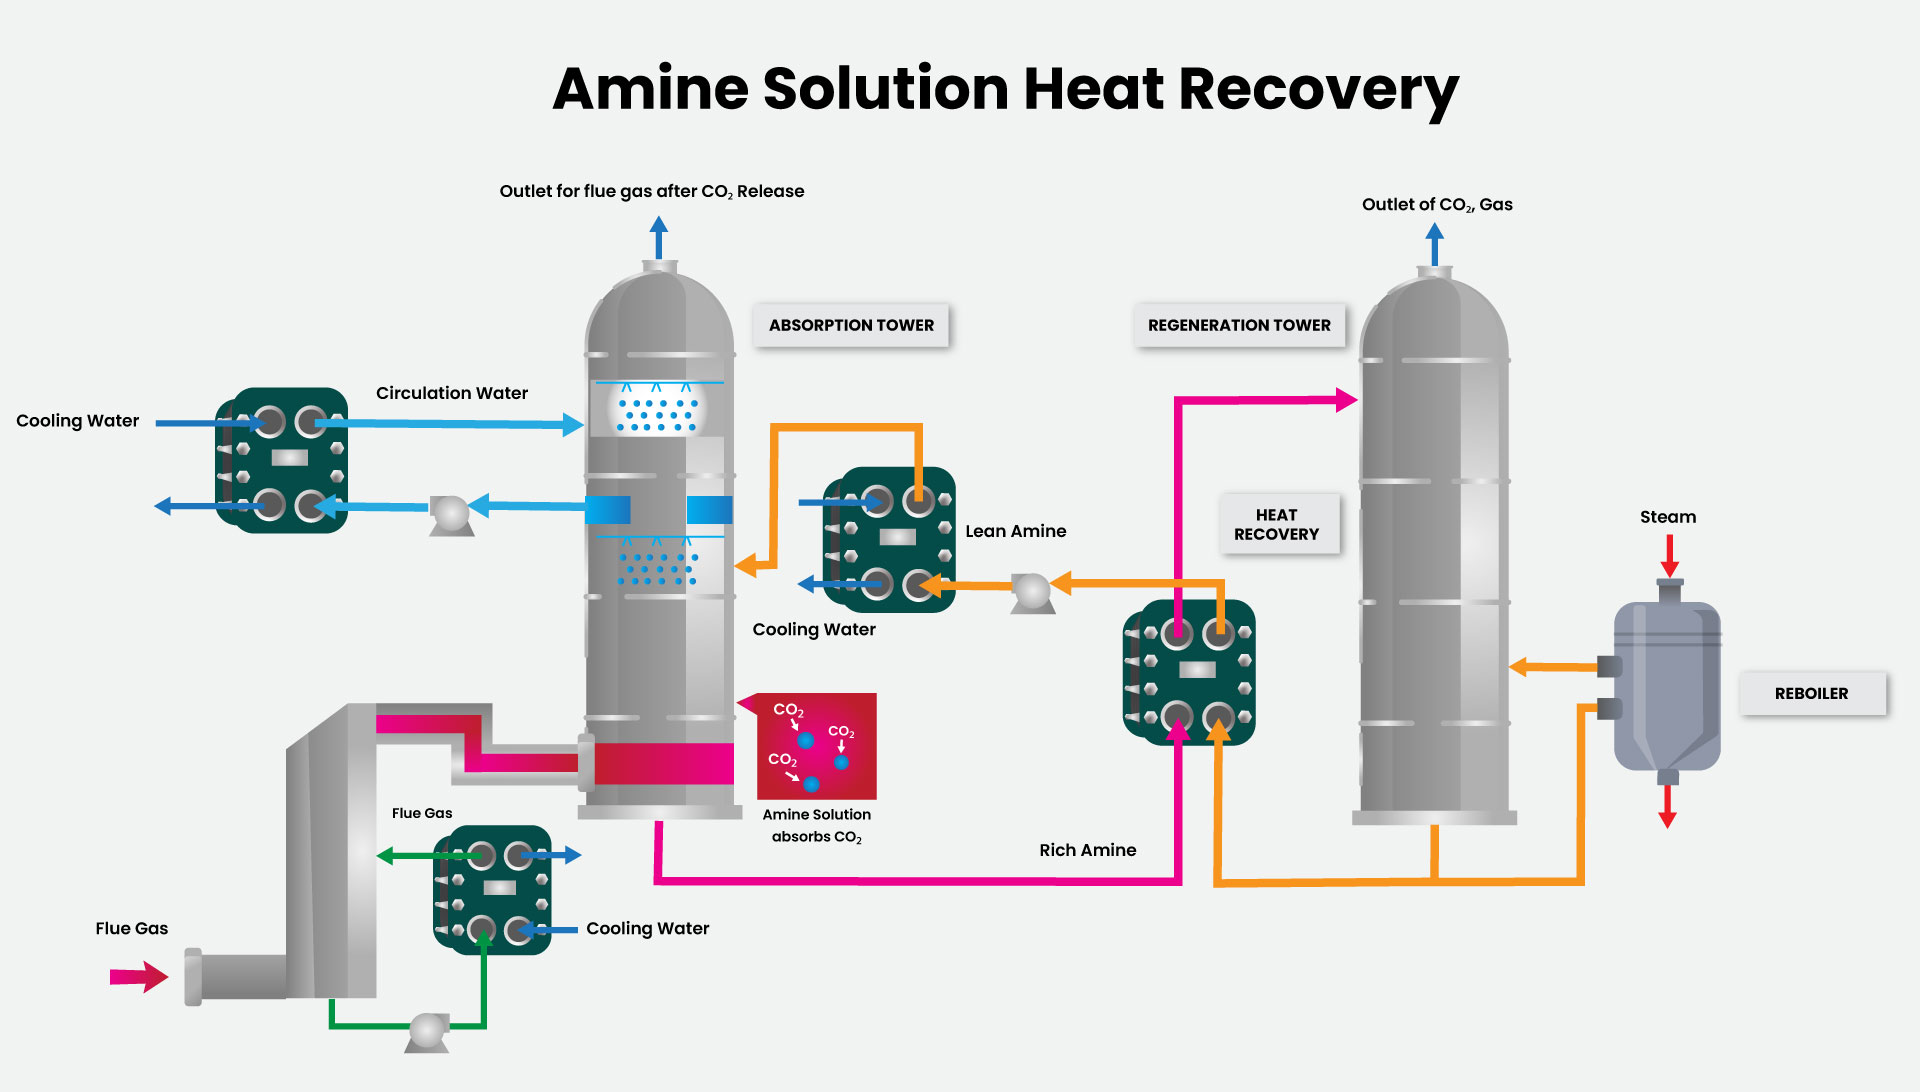 Amine Solution Heat Recovery